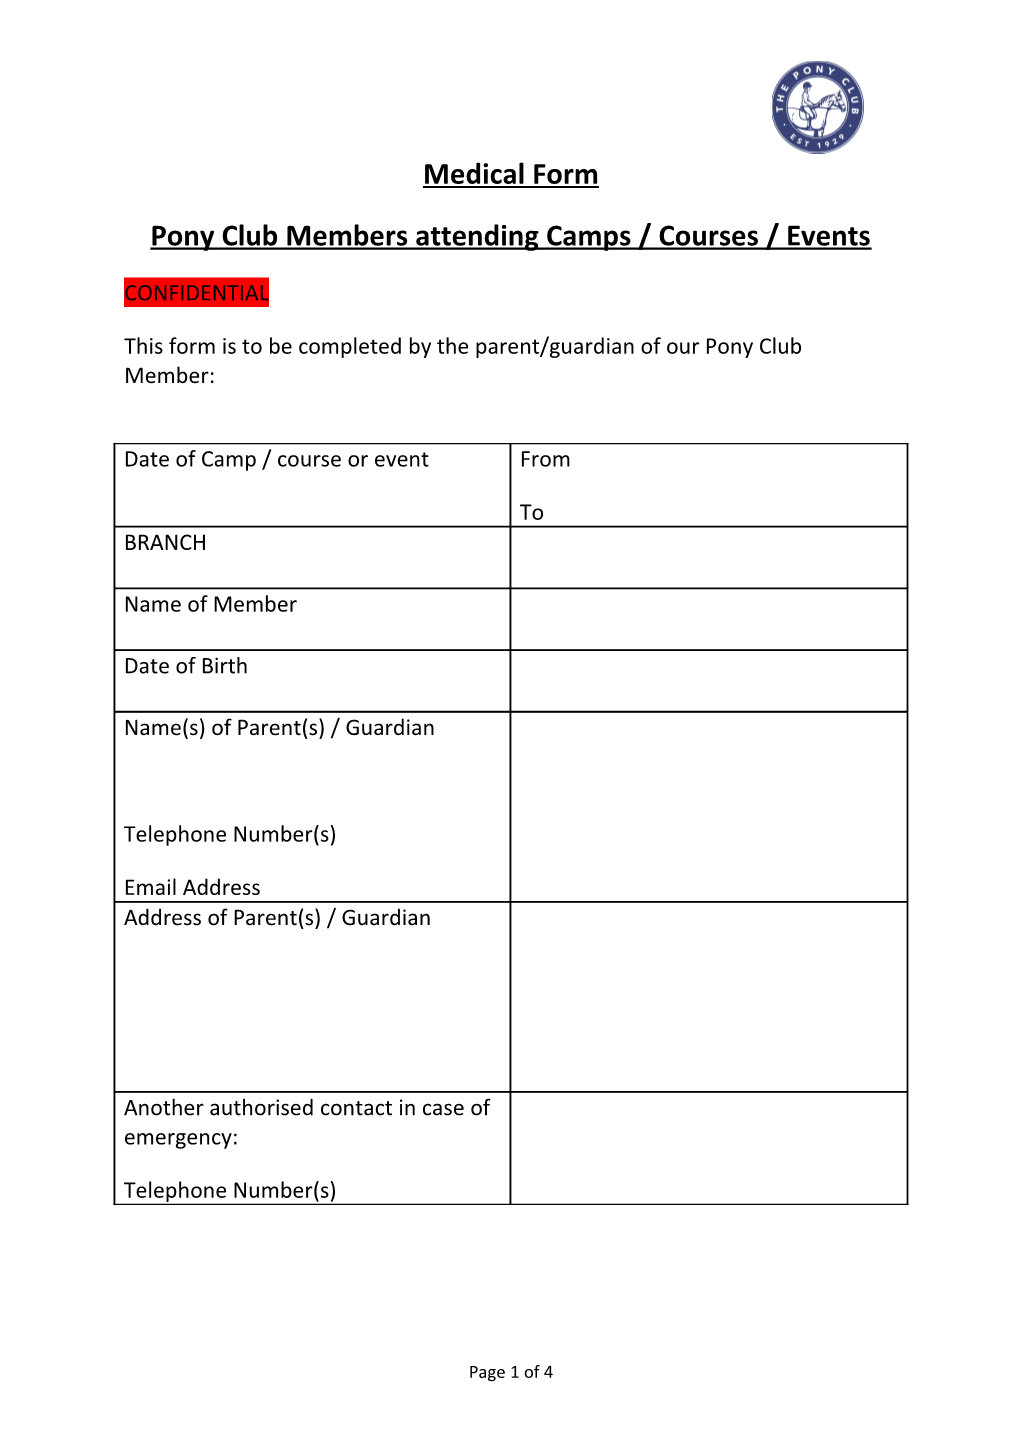 Form for Pony Club Members Attending Camps Or Courses/Events Etc